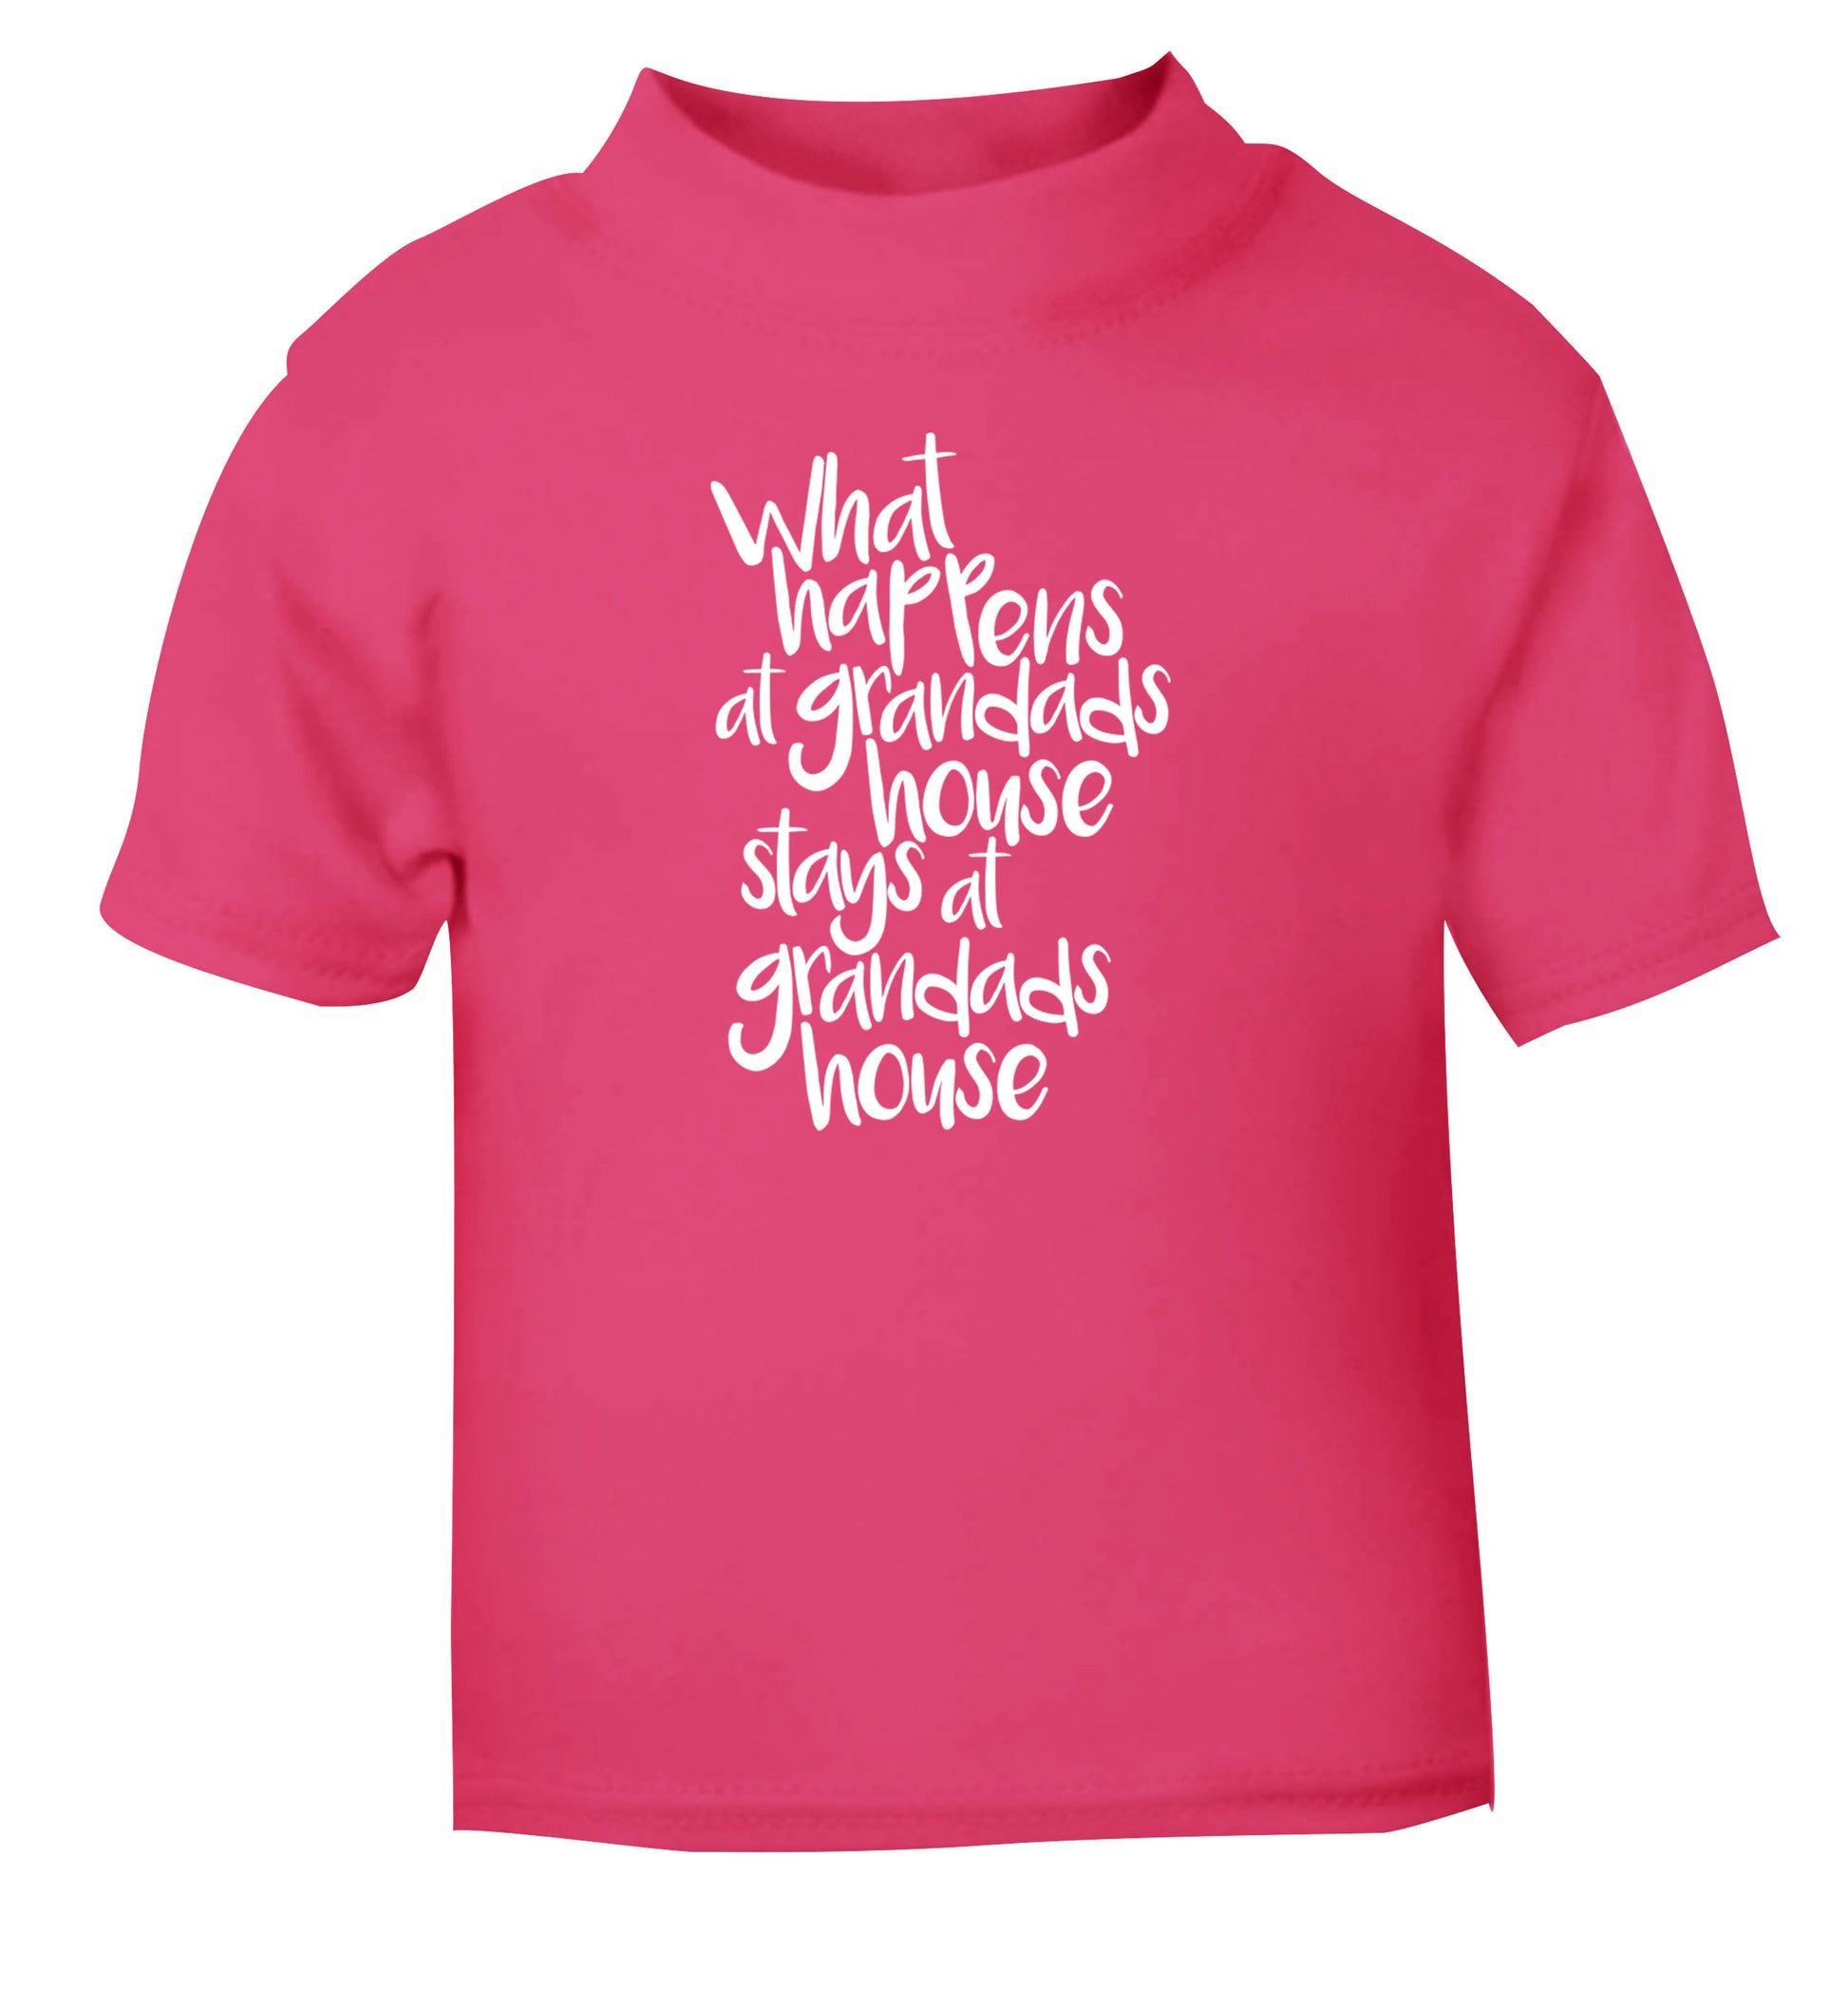 What happens at grandads house stays at grandads house pink Baby Toddler Tshirt 2 Years